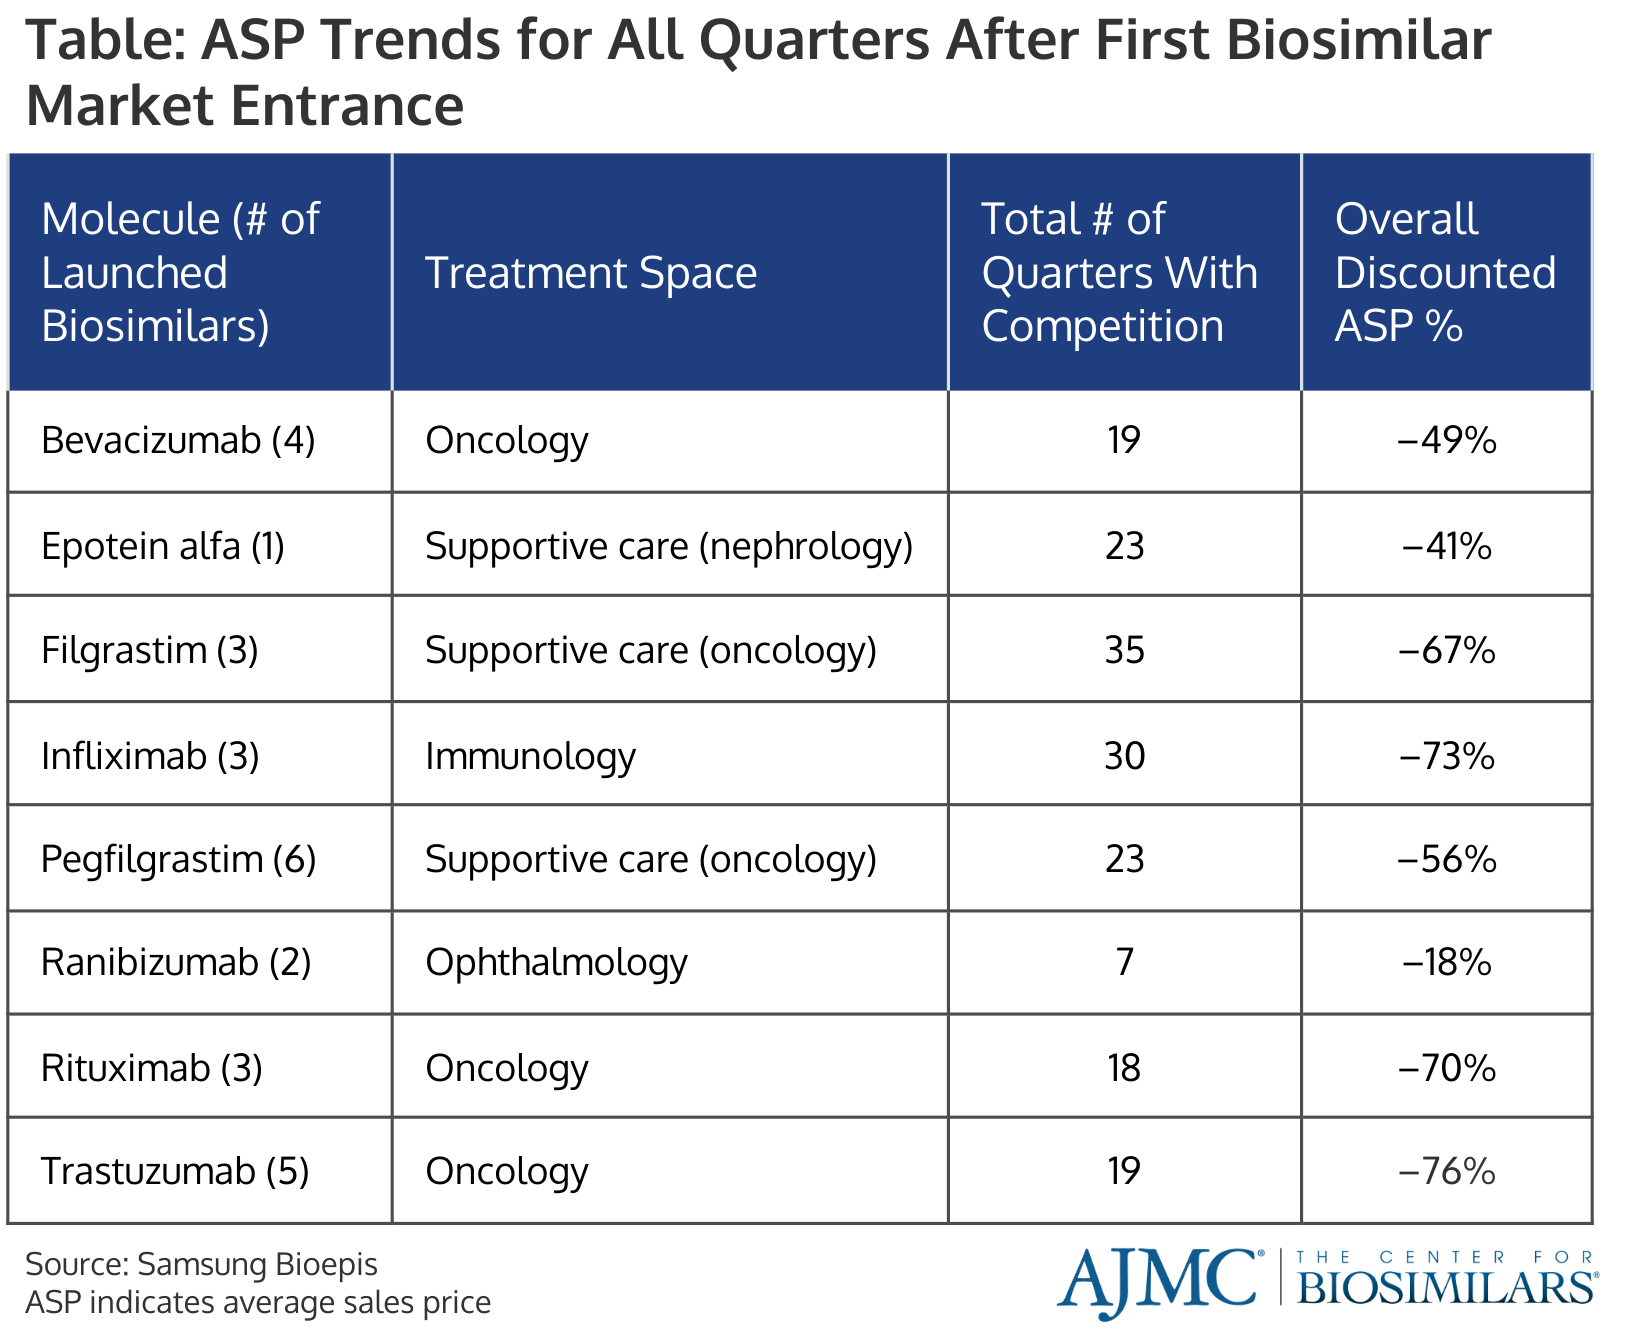 Table: ASP Trends for All Quarters After First Biosimilar Market Entrance